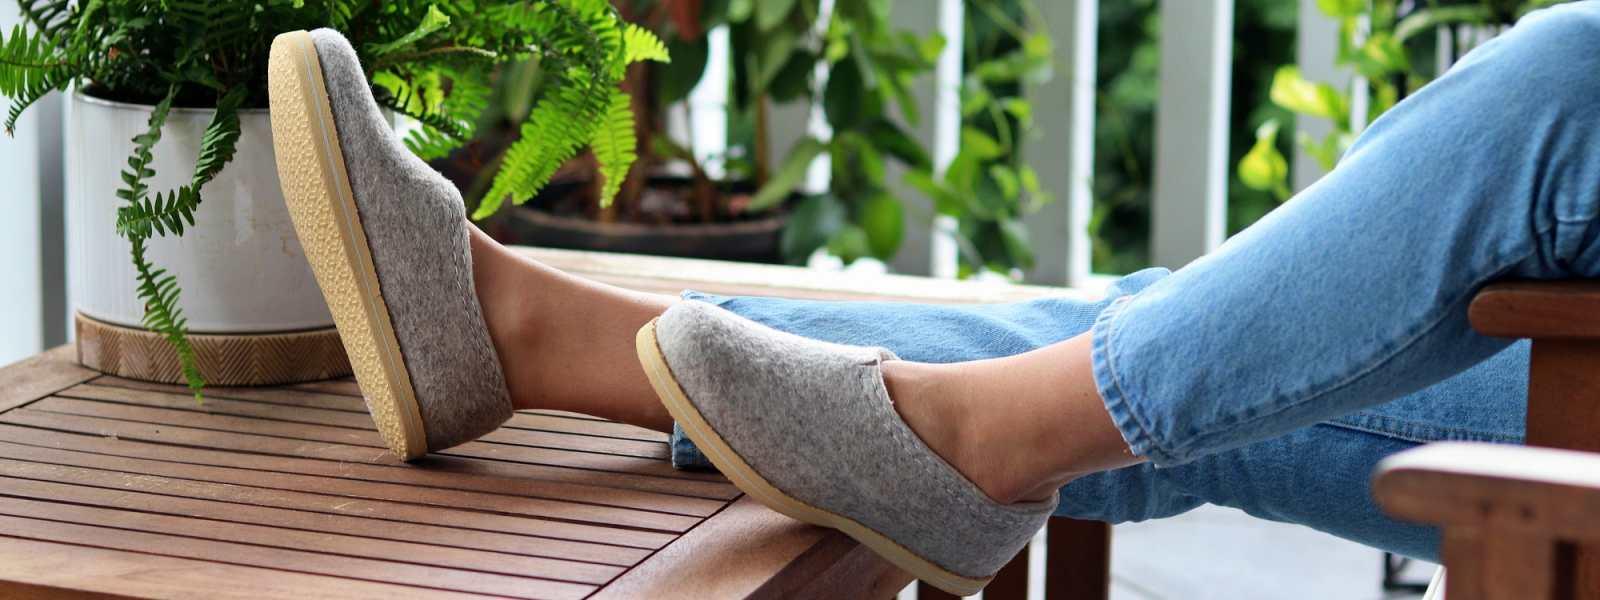 The Best Wool Slippers for the Indoors & Outdoors - Nootkas